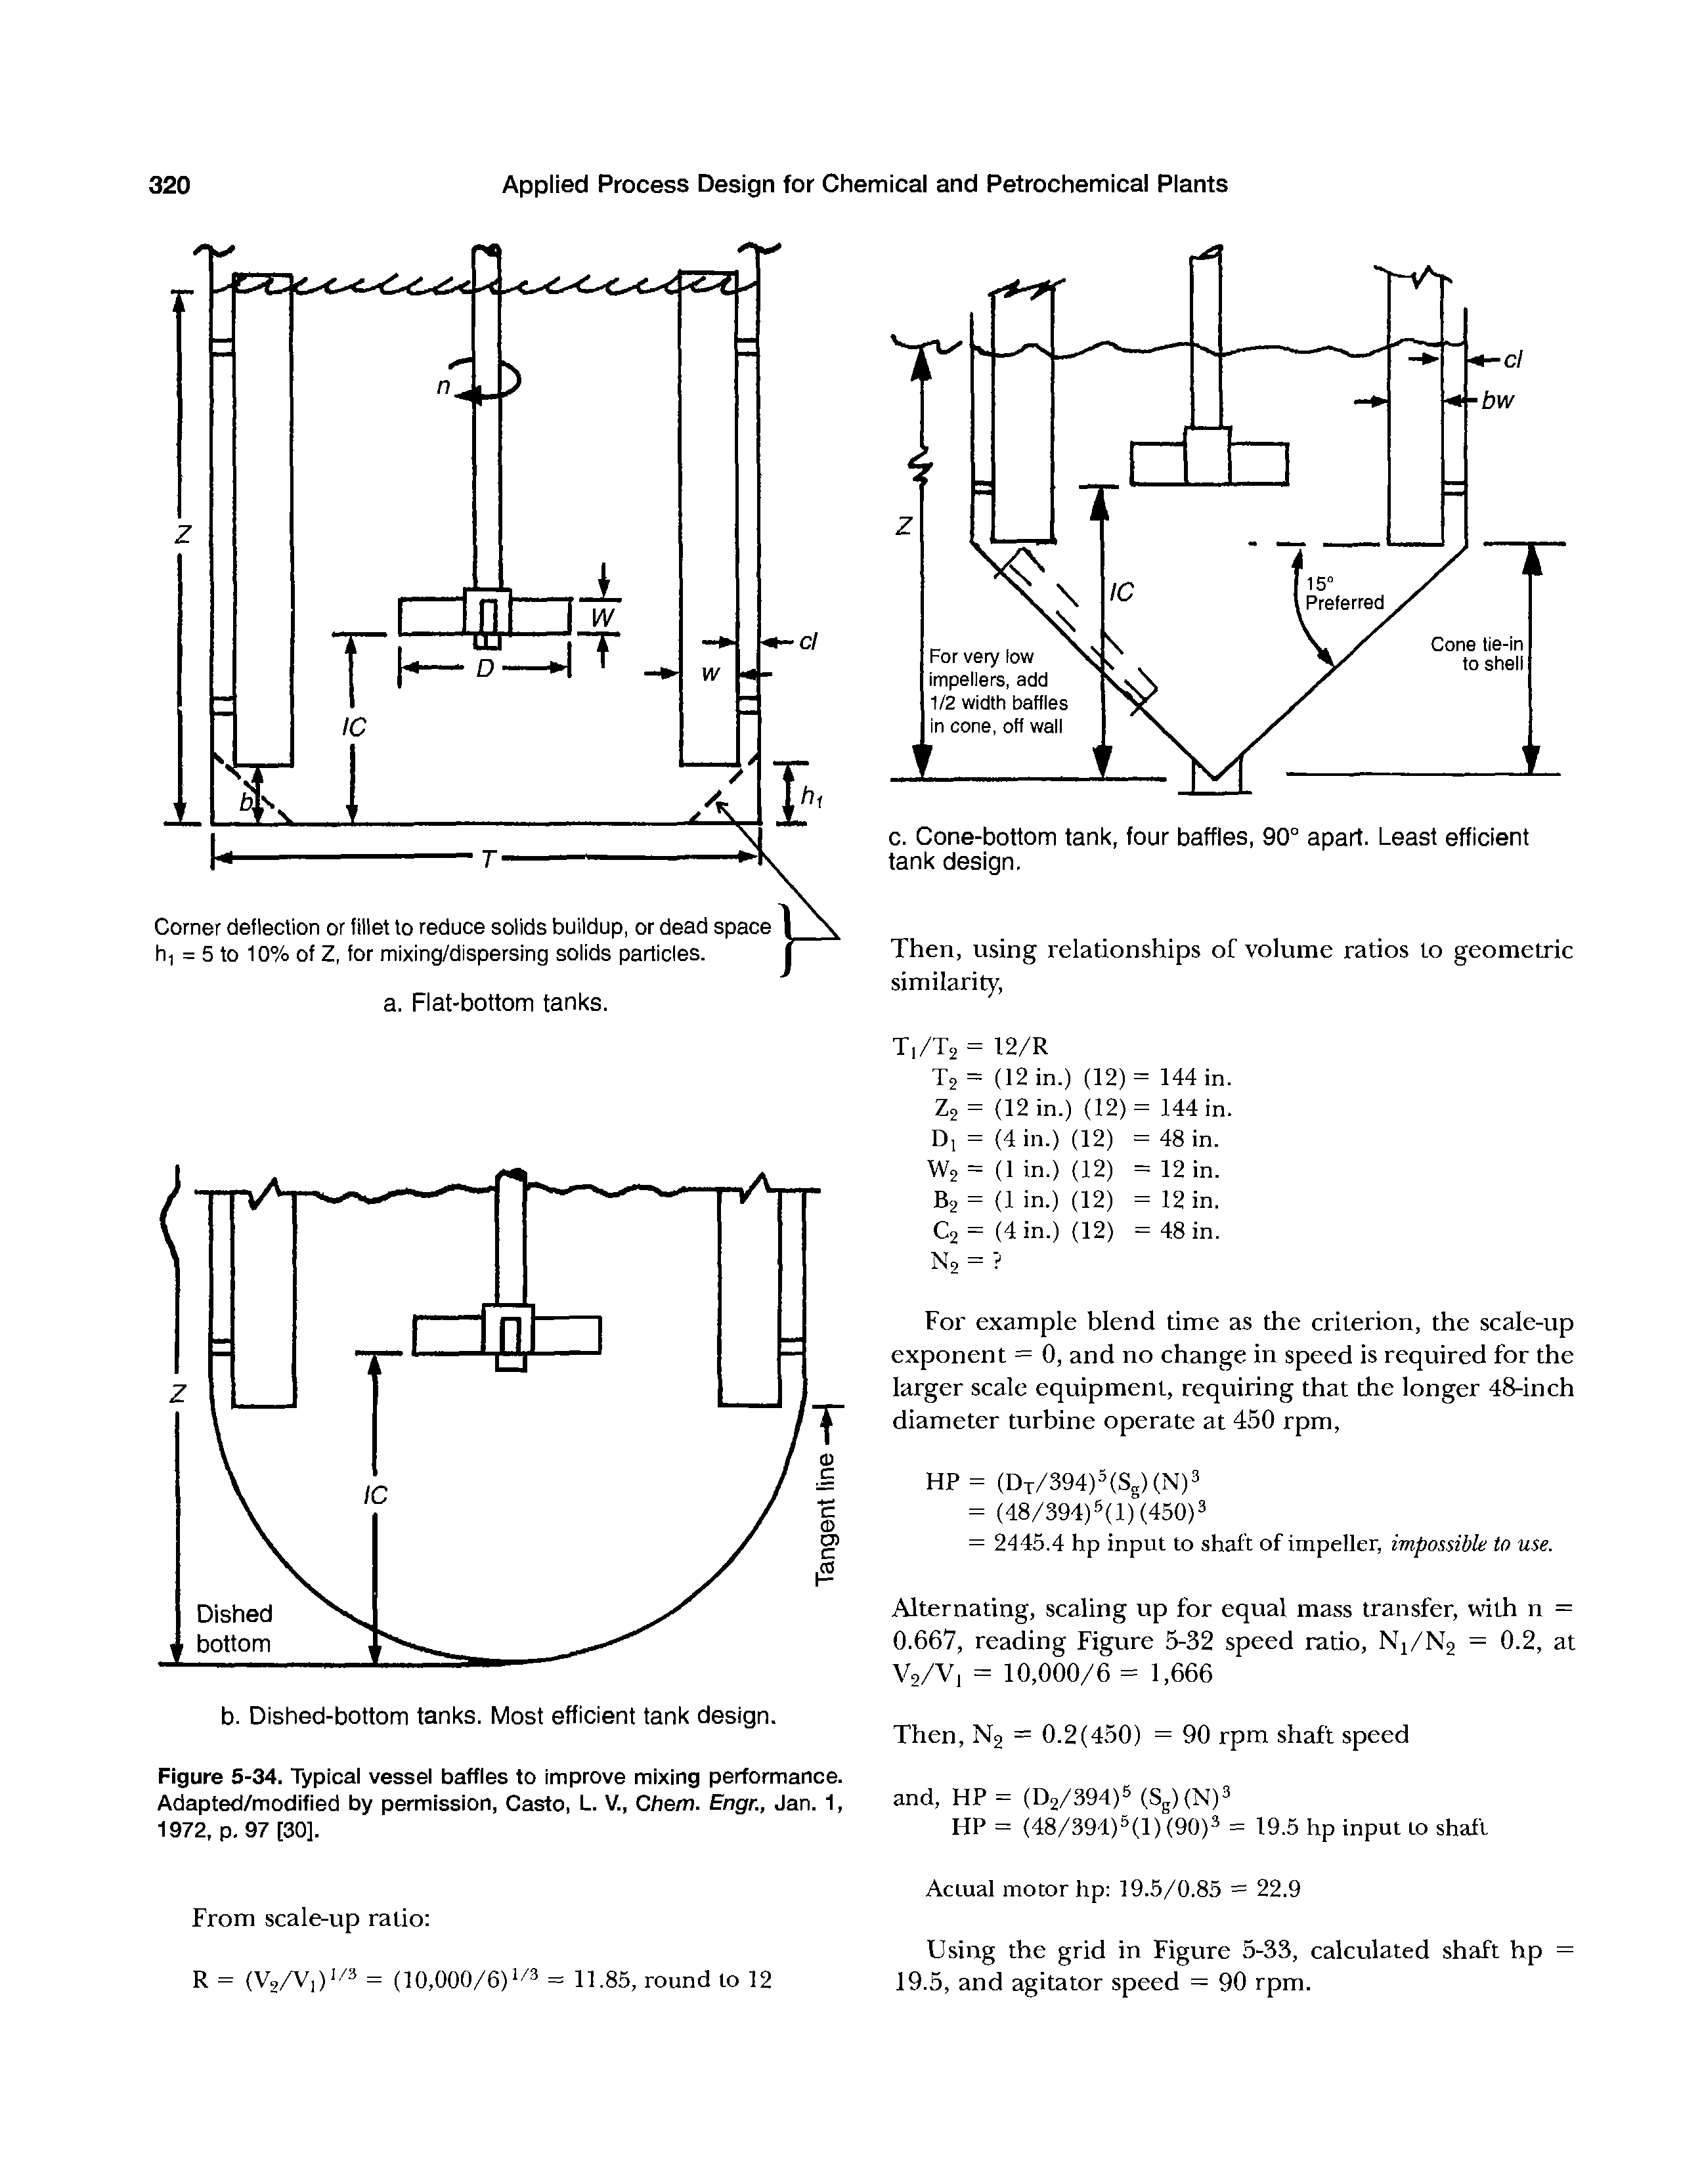 Figure 5-34. Typical vessel baffles to improve mixing performance. Adapted/modified by permission, Casto, L. V., Chem. Engr., Jan. 1, 1972, p. 97 [30].